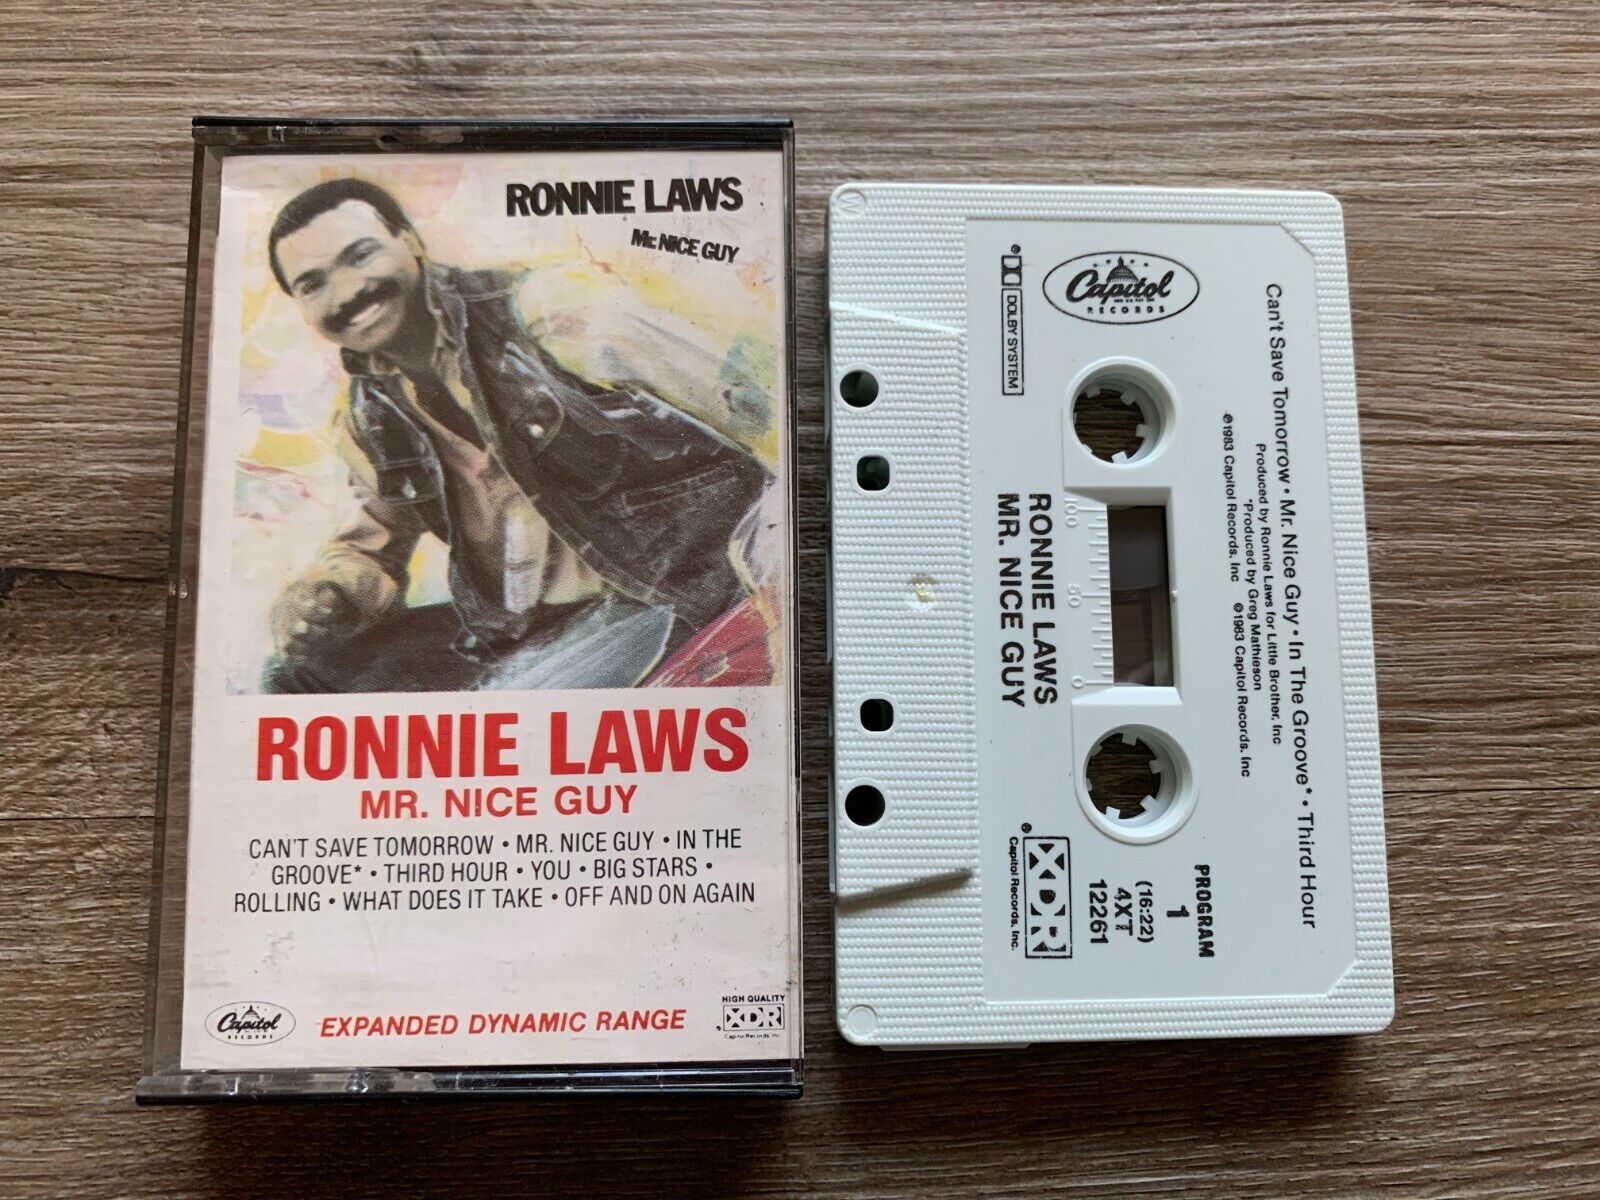 VINTAGE RONNIE LAWS MR. NICE GUY CASSETTE TAPE 